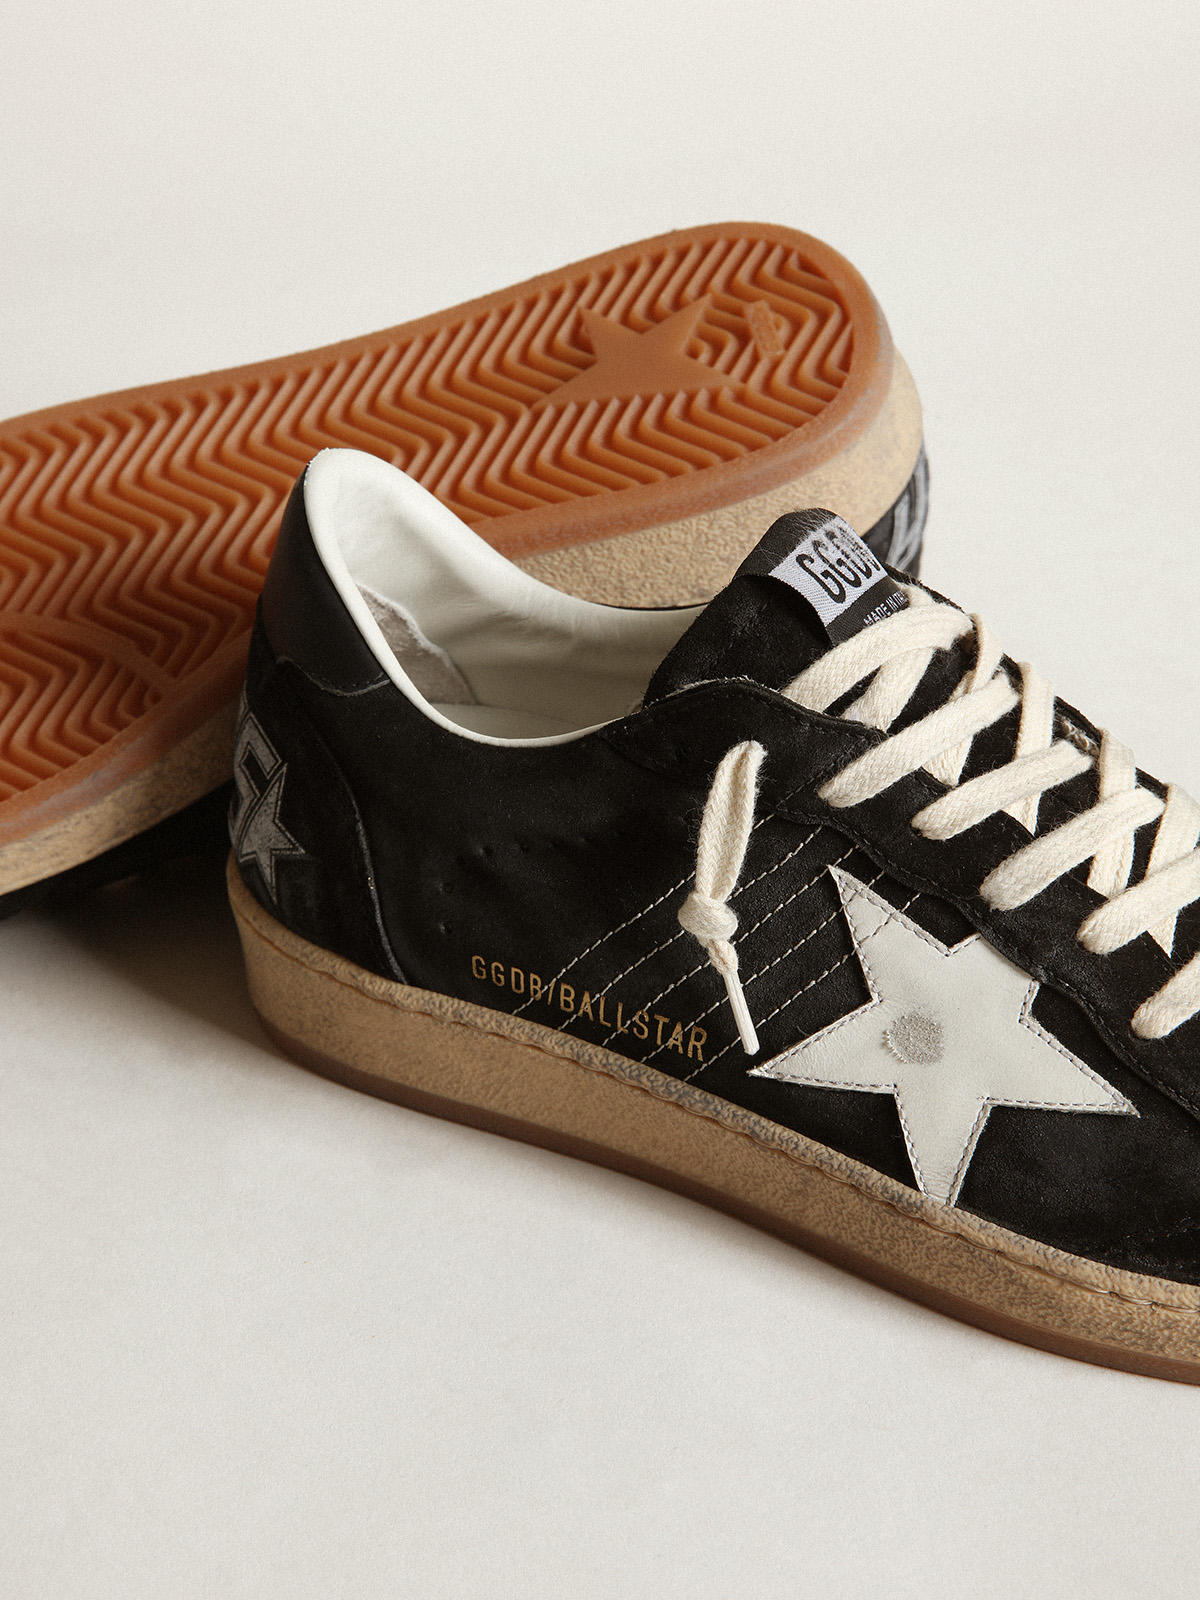 Men's Ball Star sneakers in black suede with white leather star 